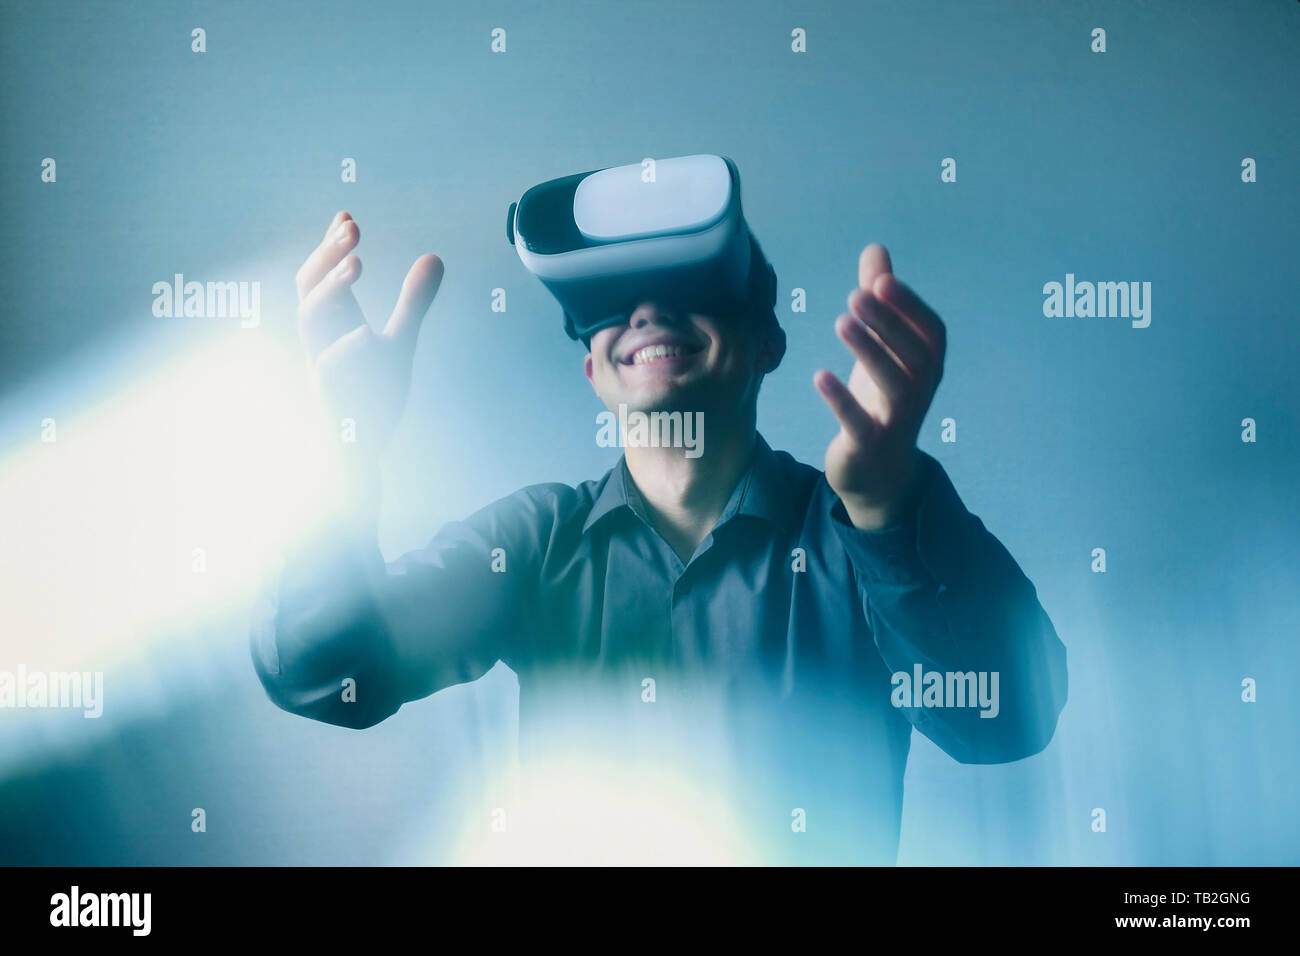 Man wearing virtual reality headset or goggles gesturing with his hands with atmospheric light flare in a conceptual image Stock Photo